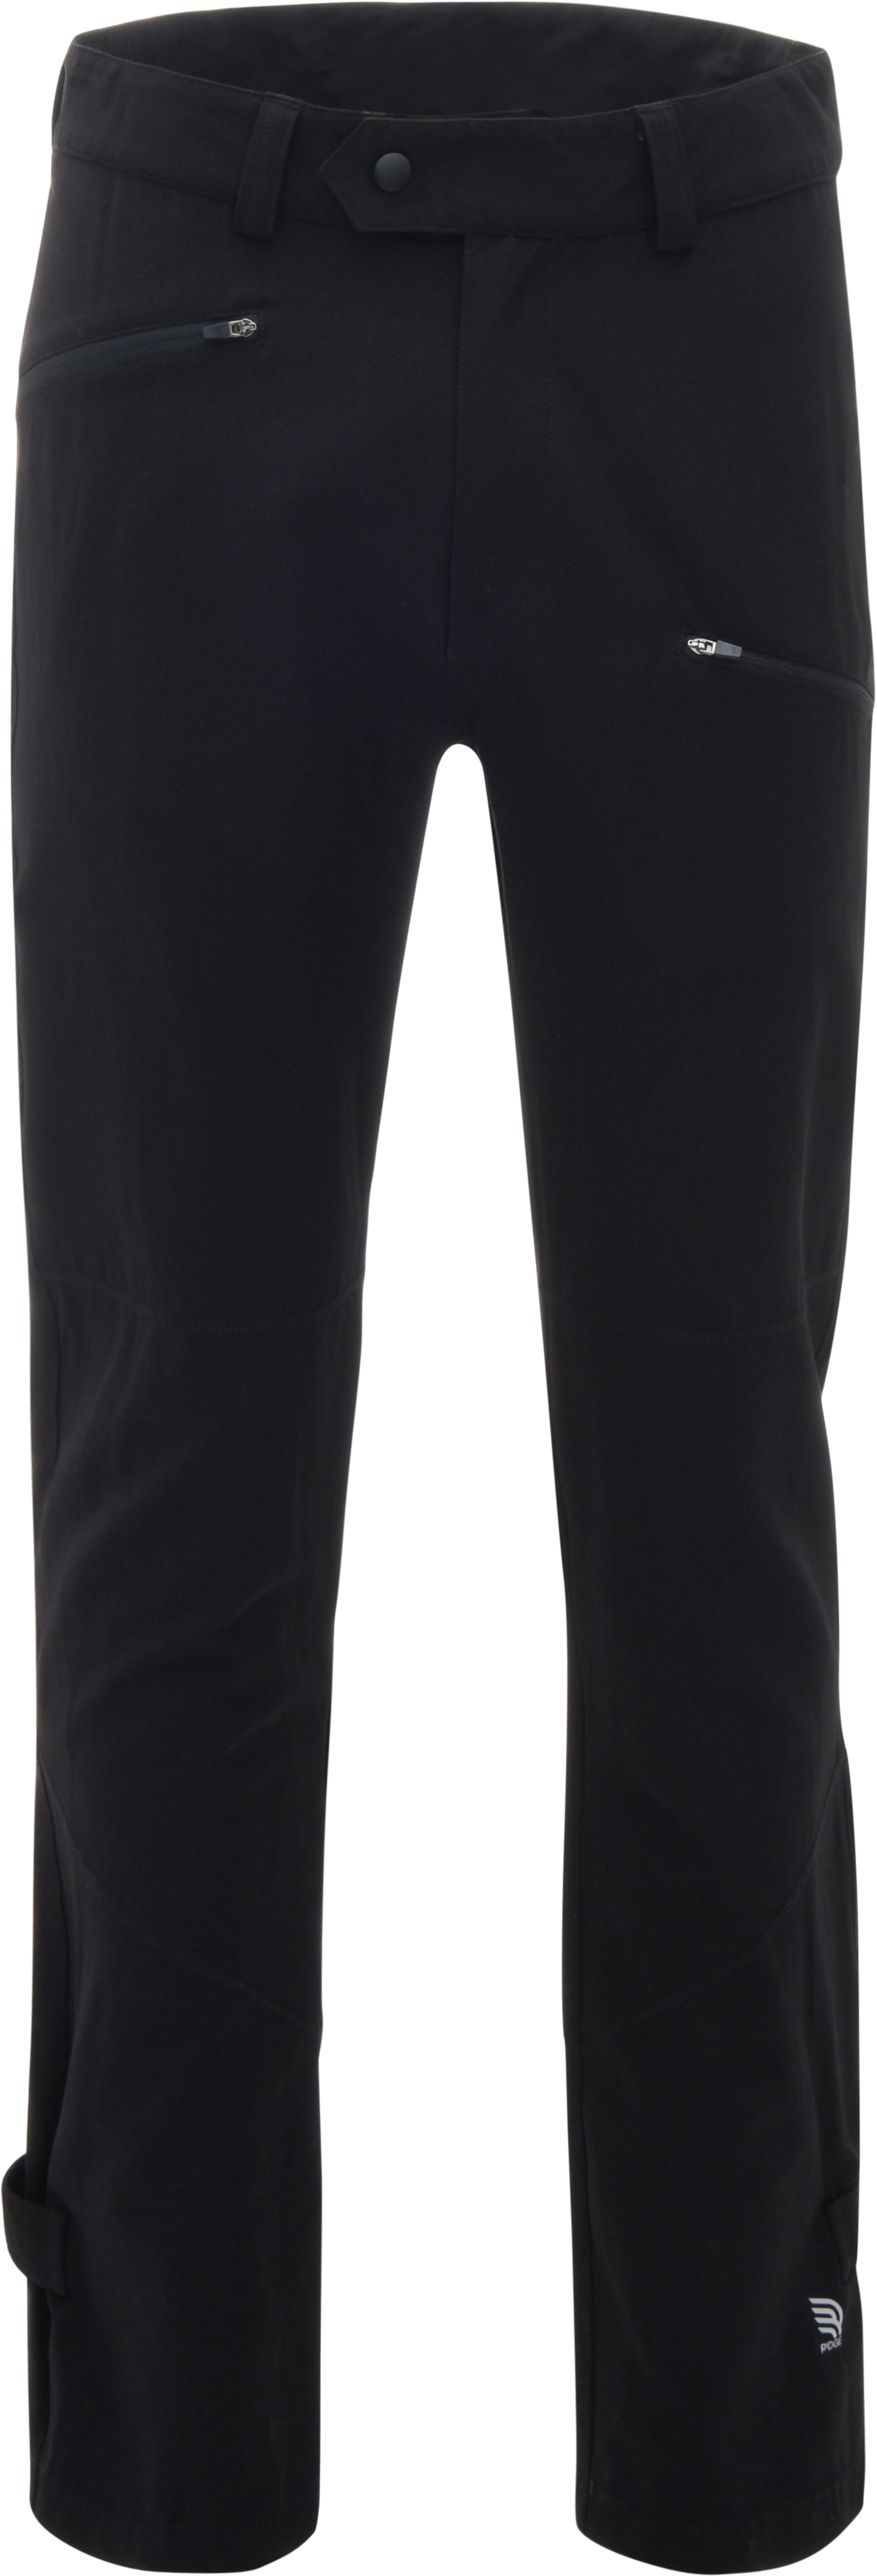 Ridge Mens Causal Cycling Trousers, Large